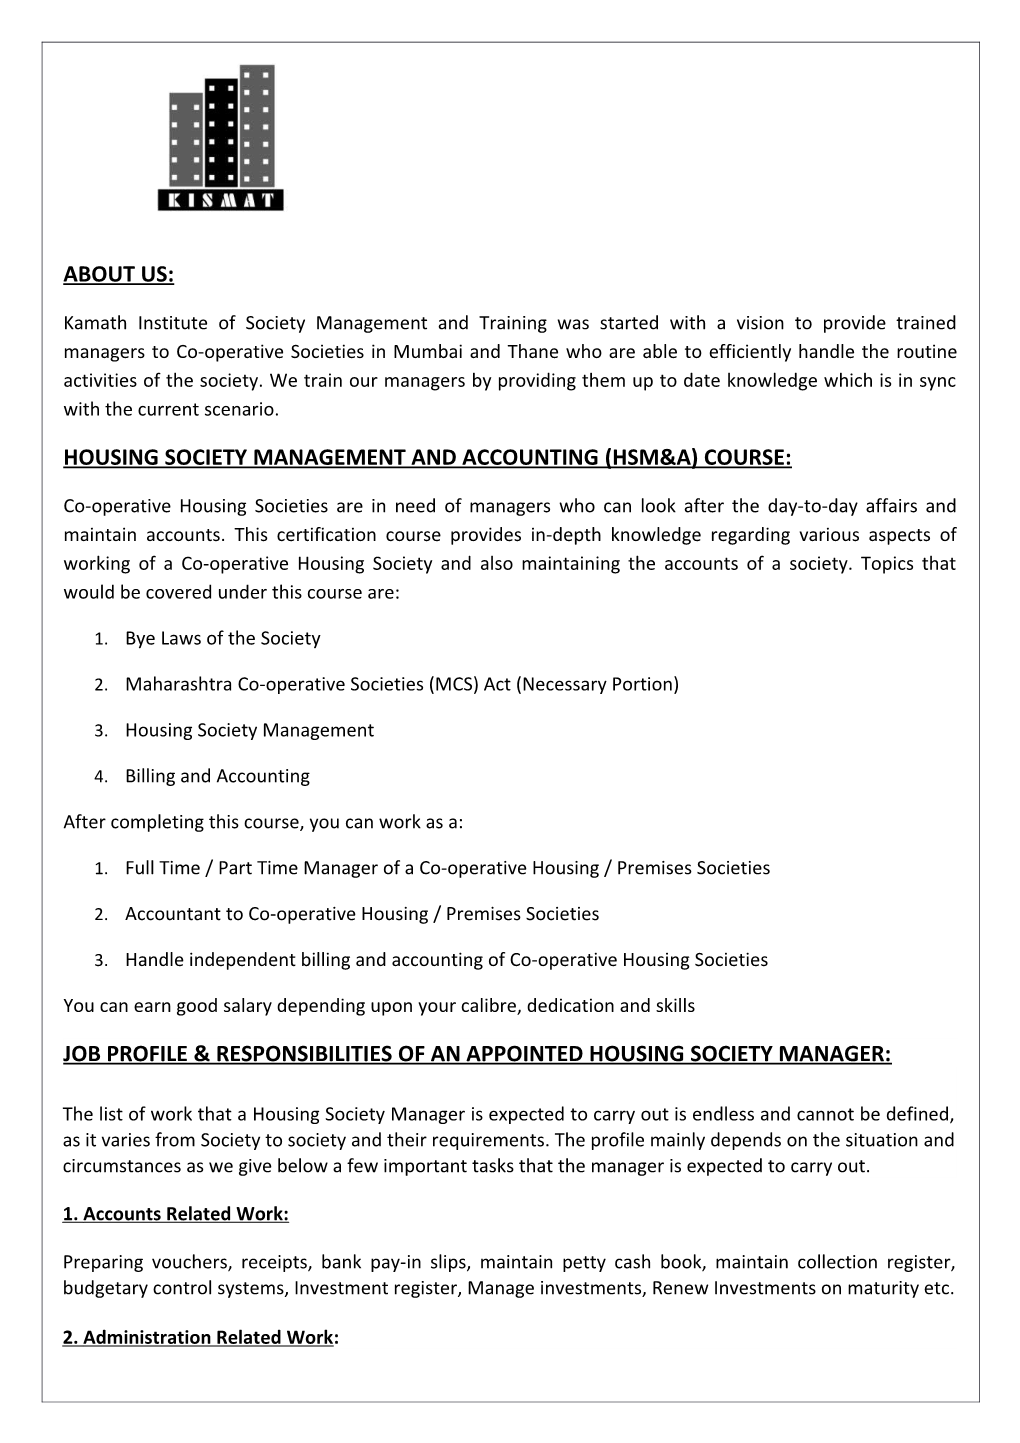 Housing Society Management and Accounting (Hsm&A) Course